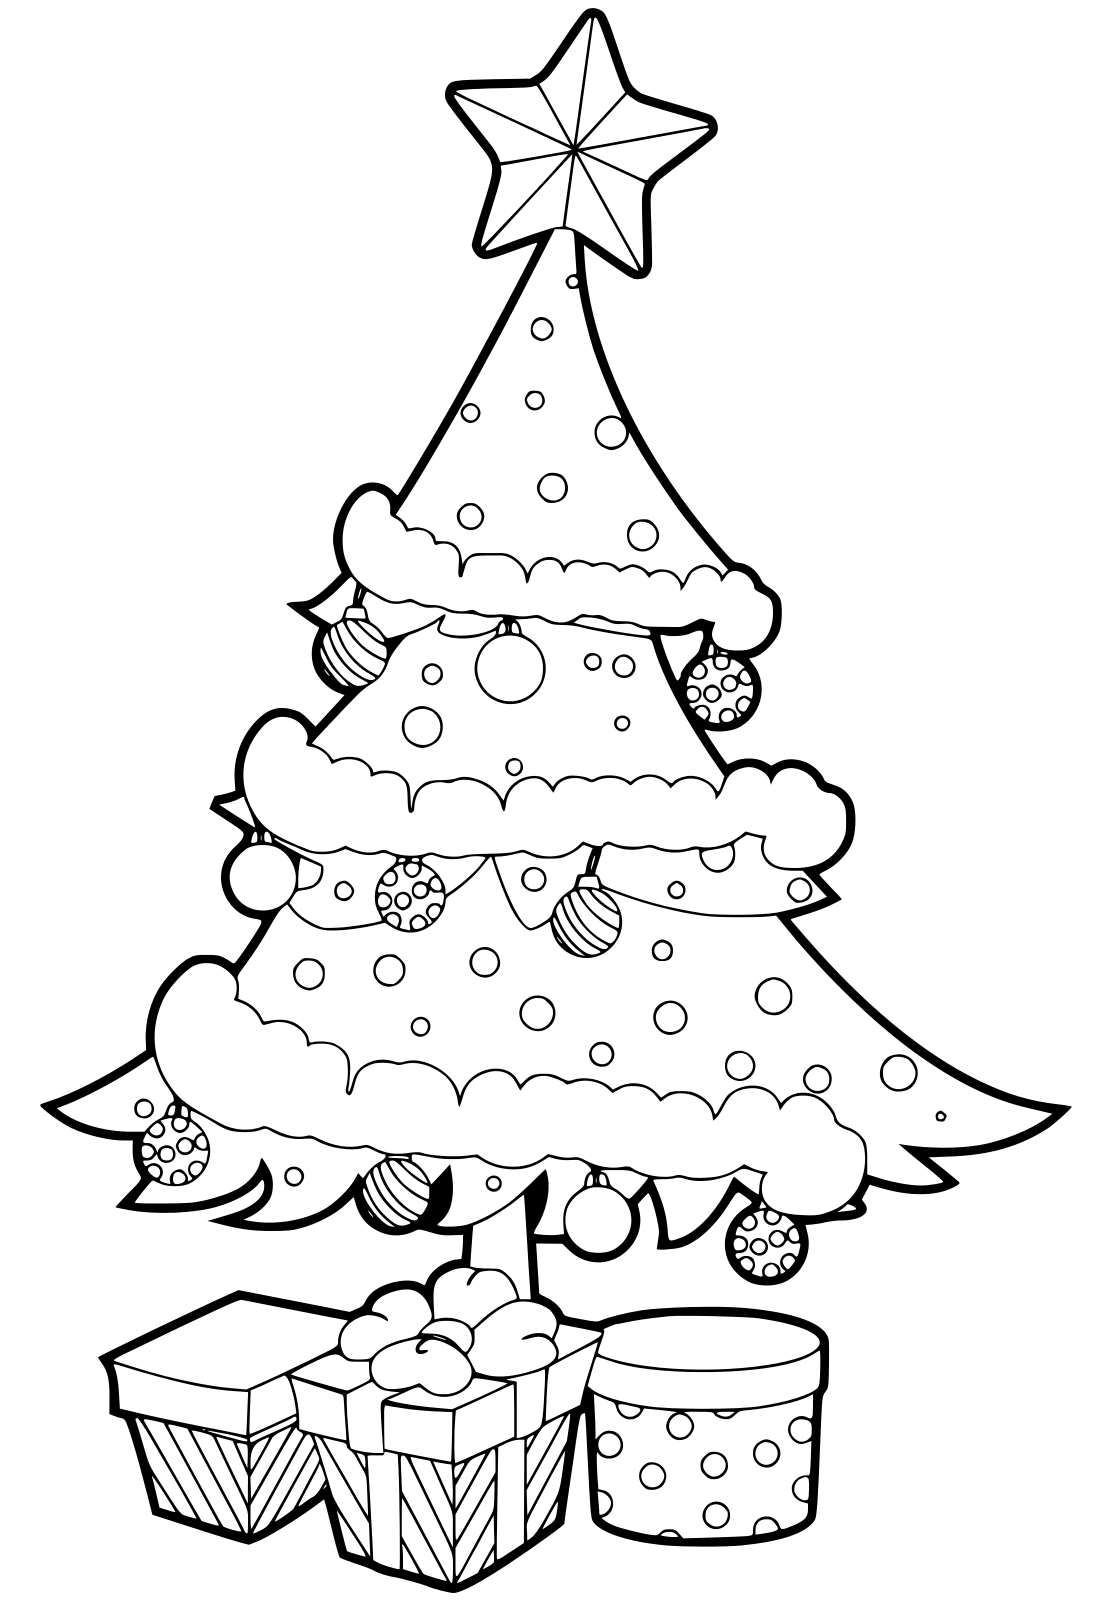 Outlined Christmas Tree With Gift Box Coloring Page